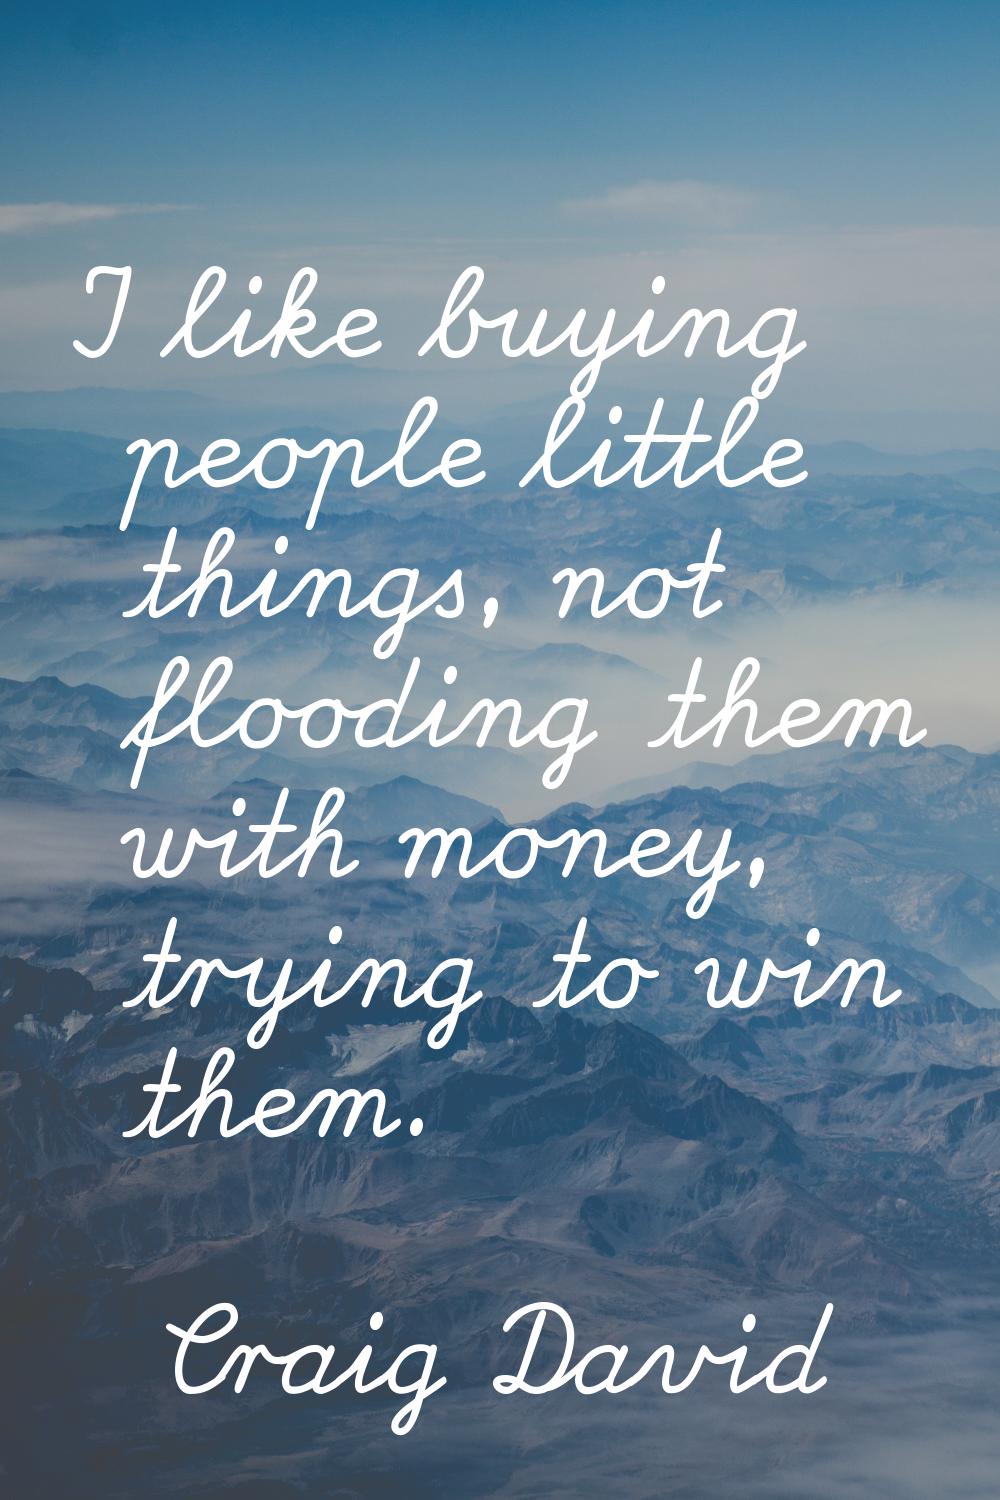 I like buying people little things, not flooding them with money, trying to win them.